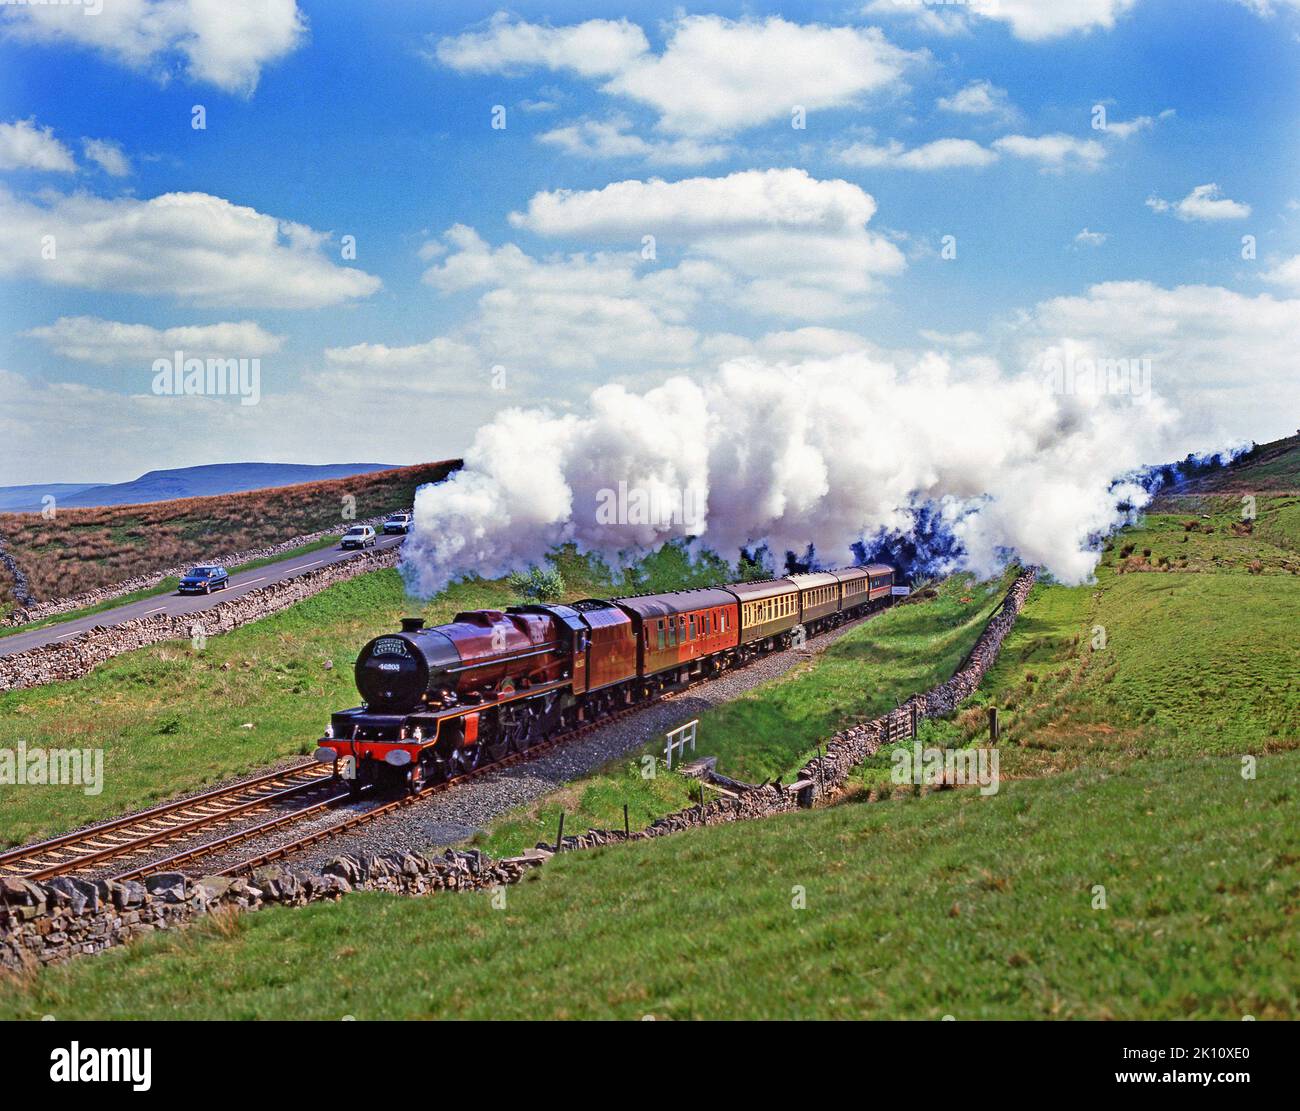 Stanier Locomotive no 46203 Princess Margaret Rose coming out of Shotlock Hill Tunnel, Settle to Carlsile Railway, England Stock Photo